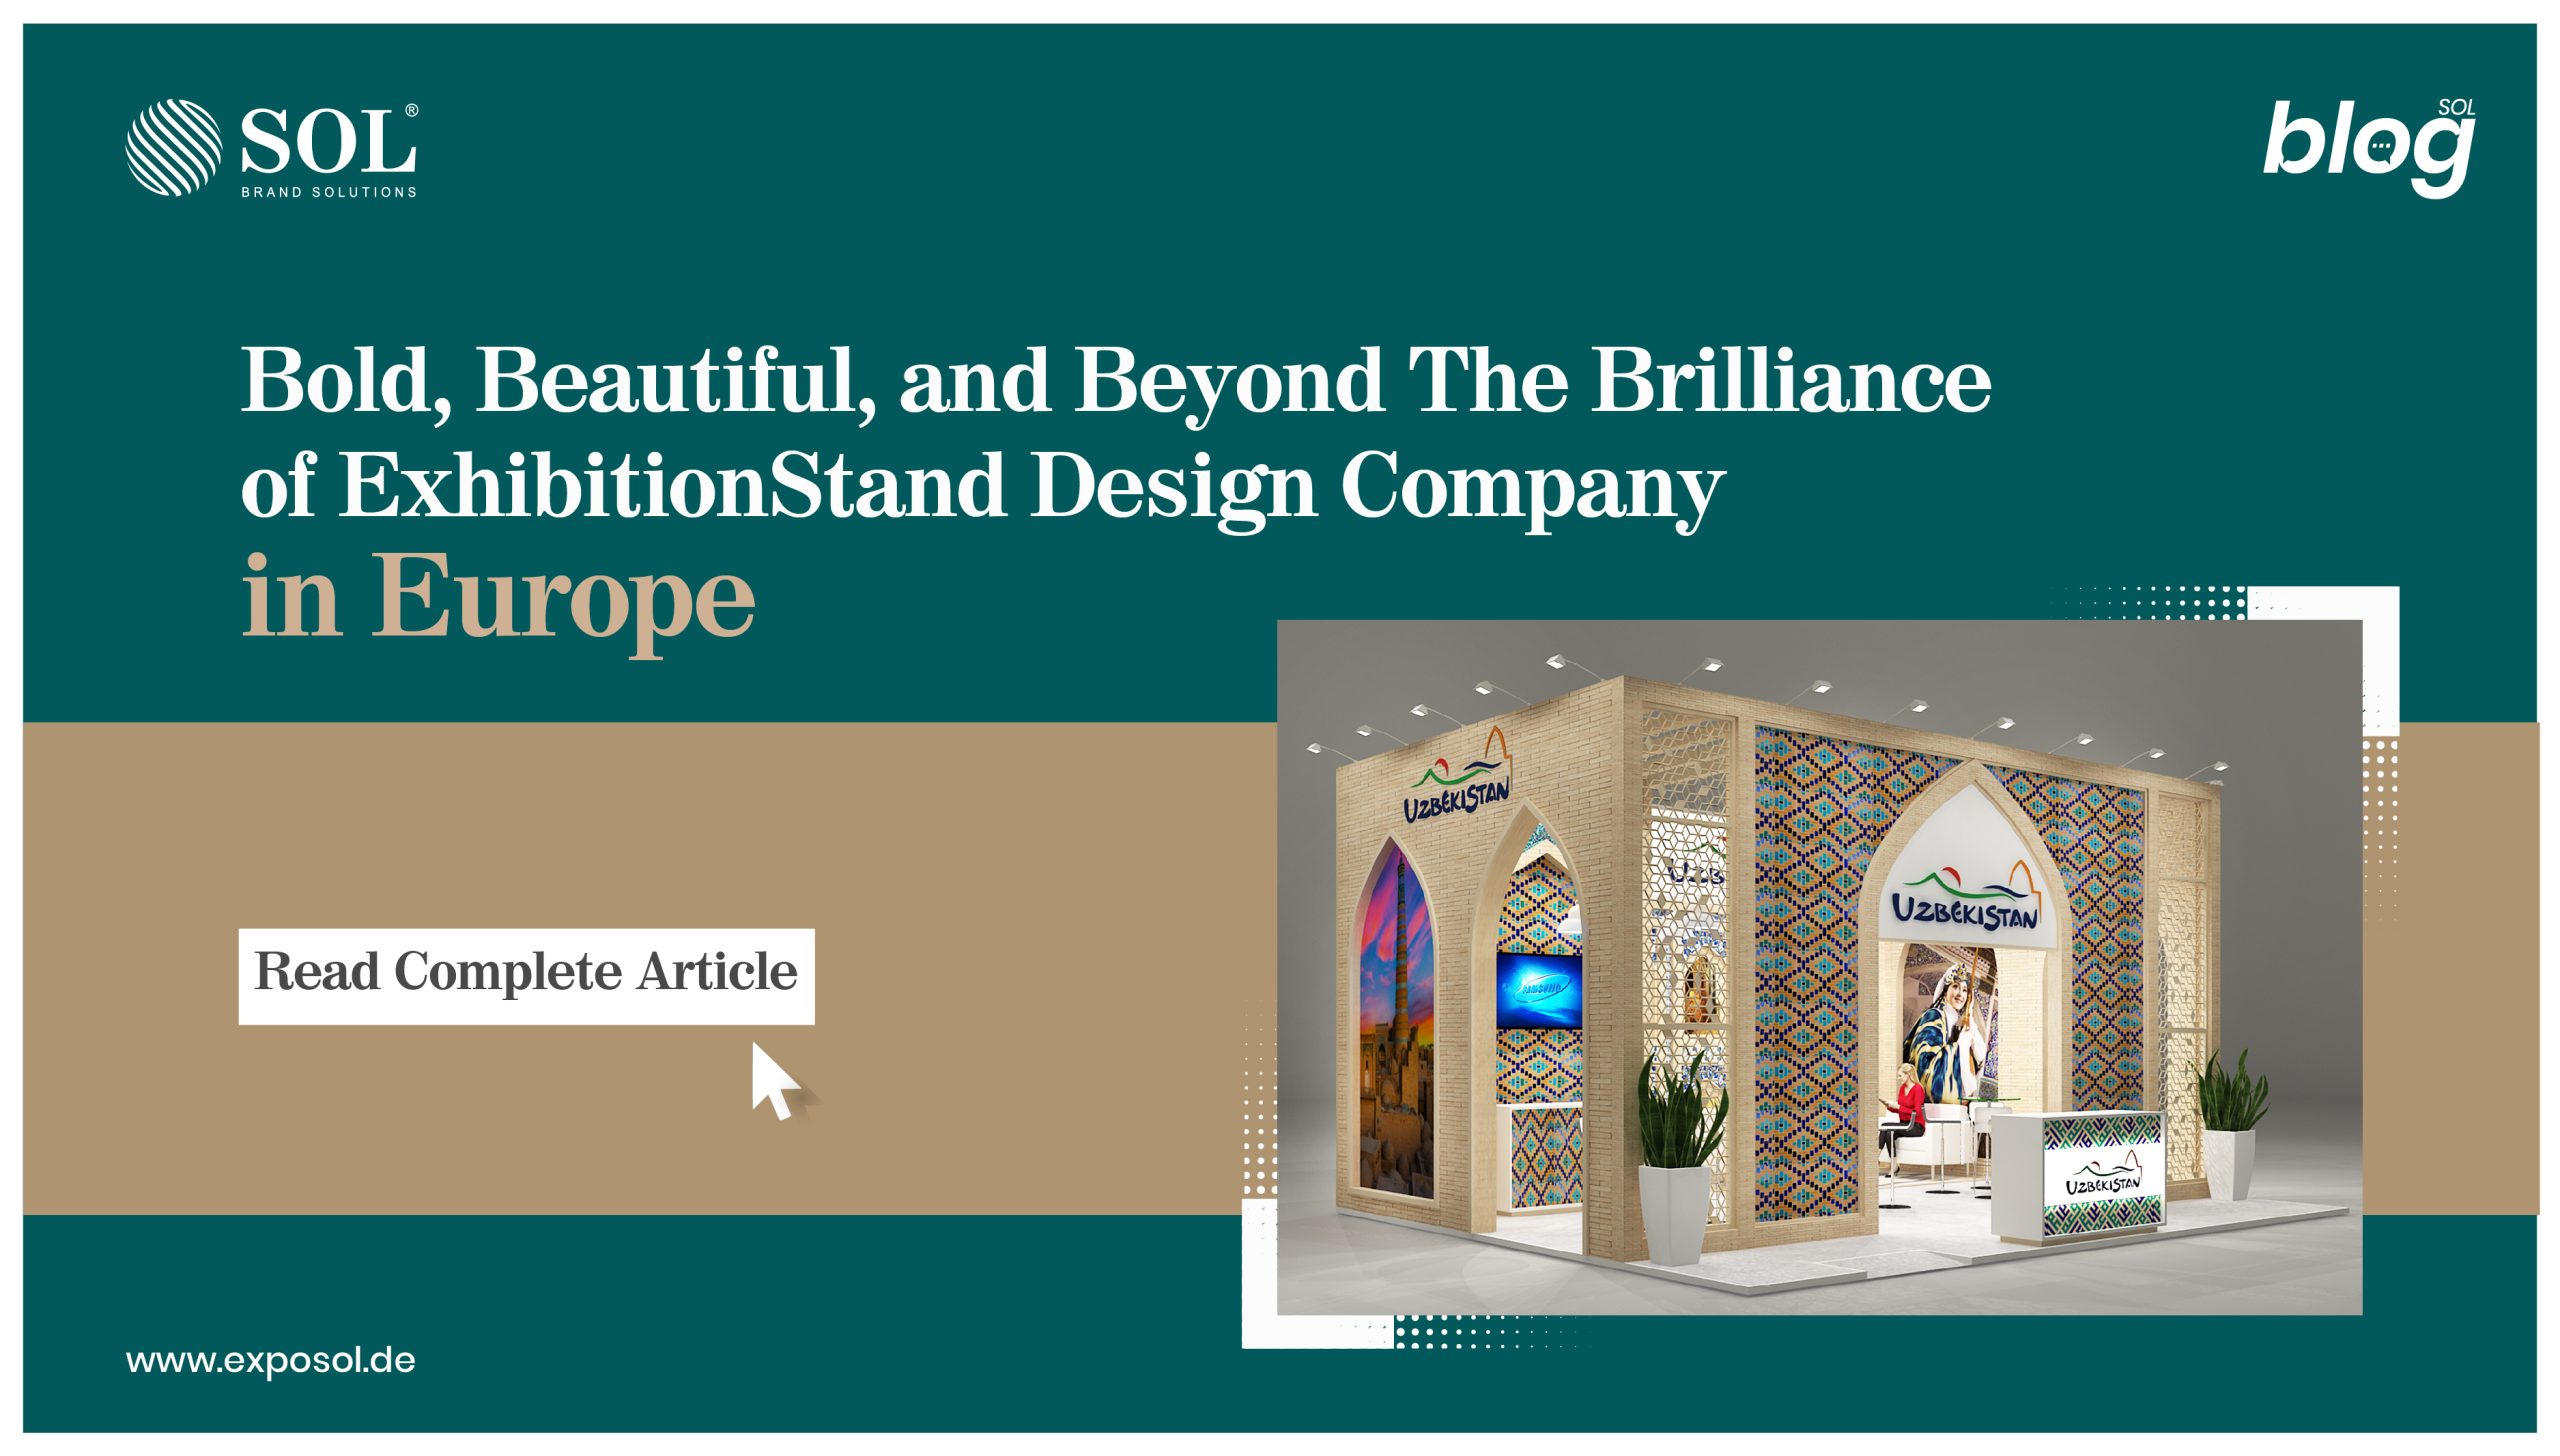 Bold, Beautiful, and Beyond: The Brilliance of Exhibition Stand Design Companies